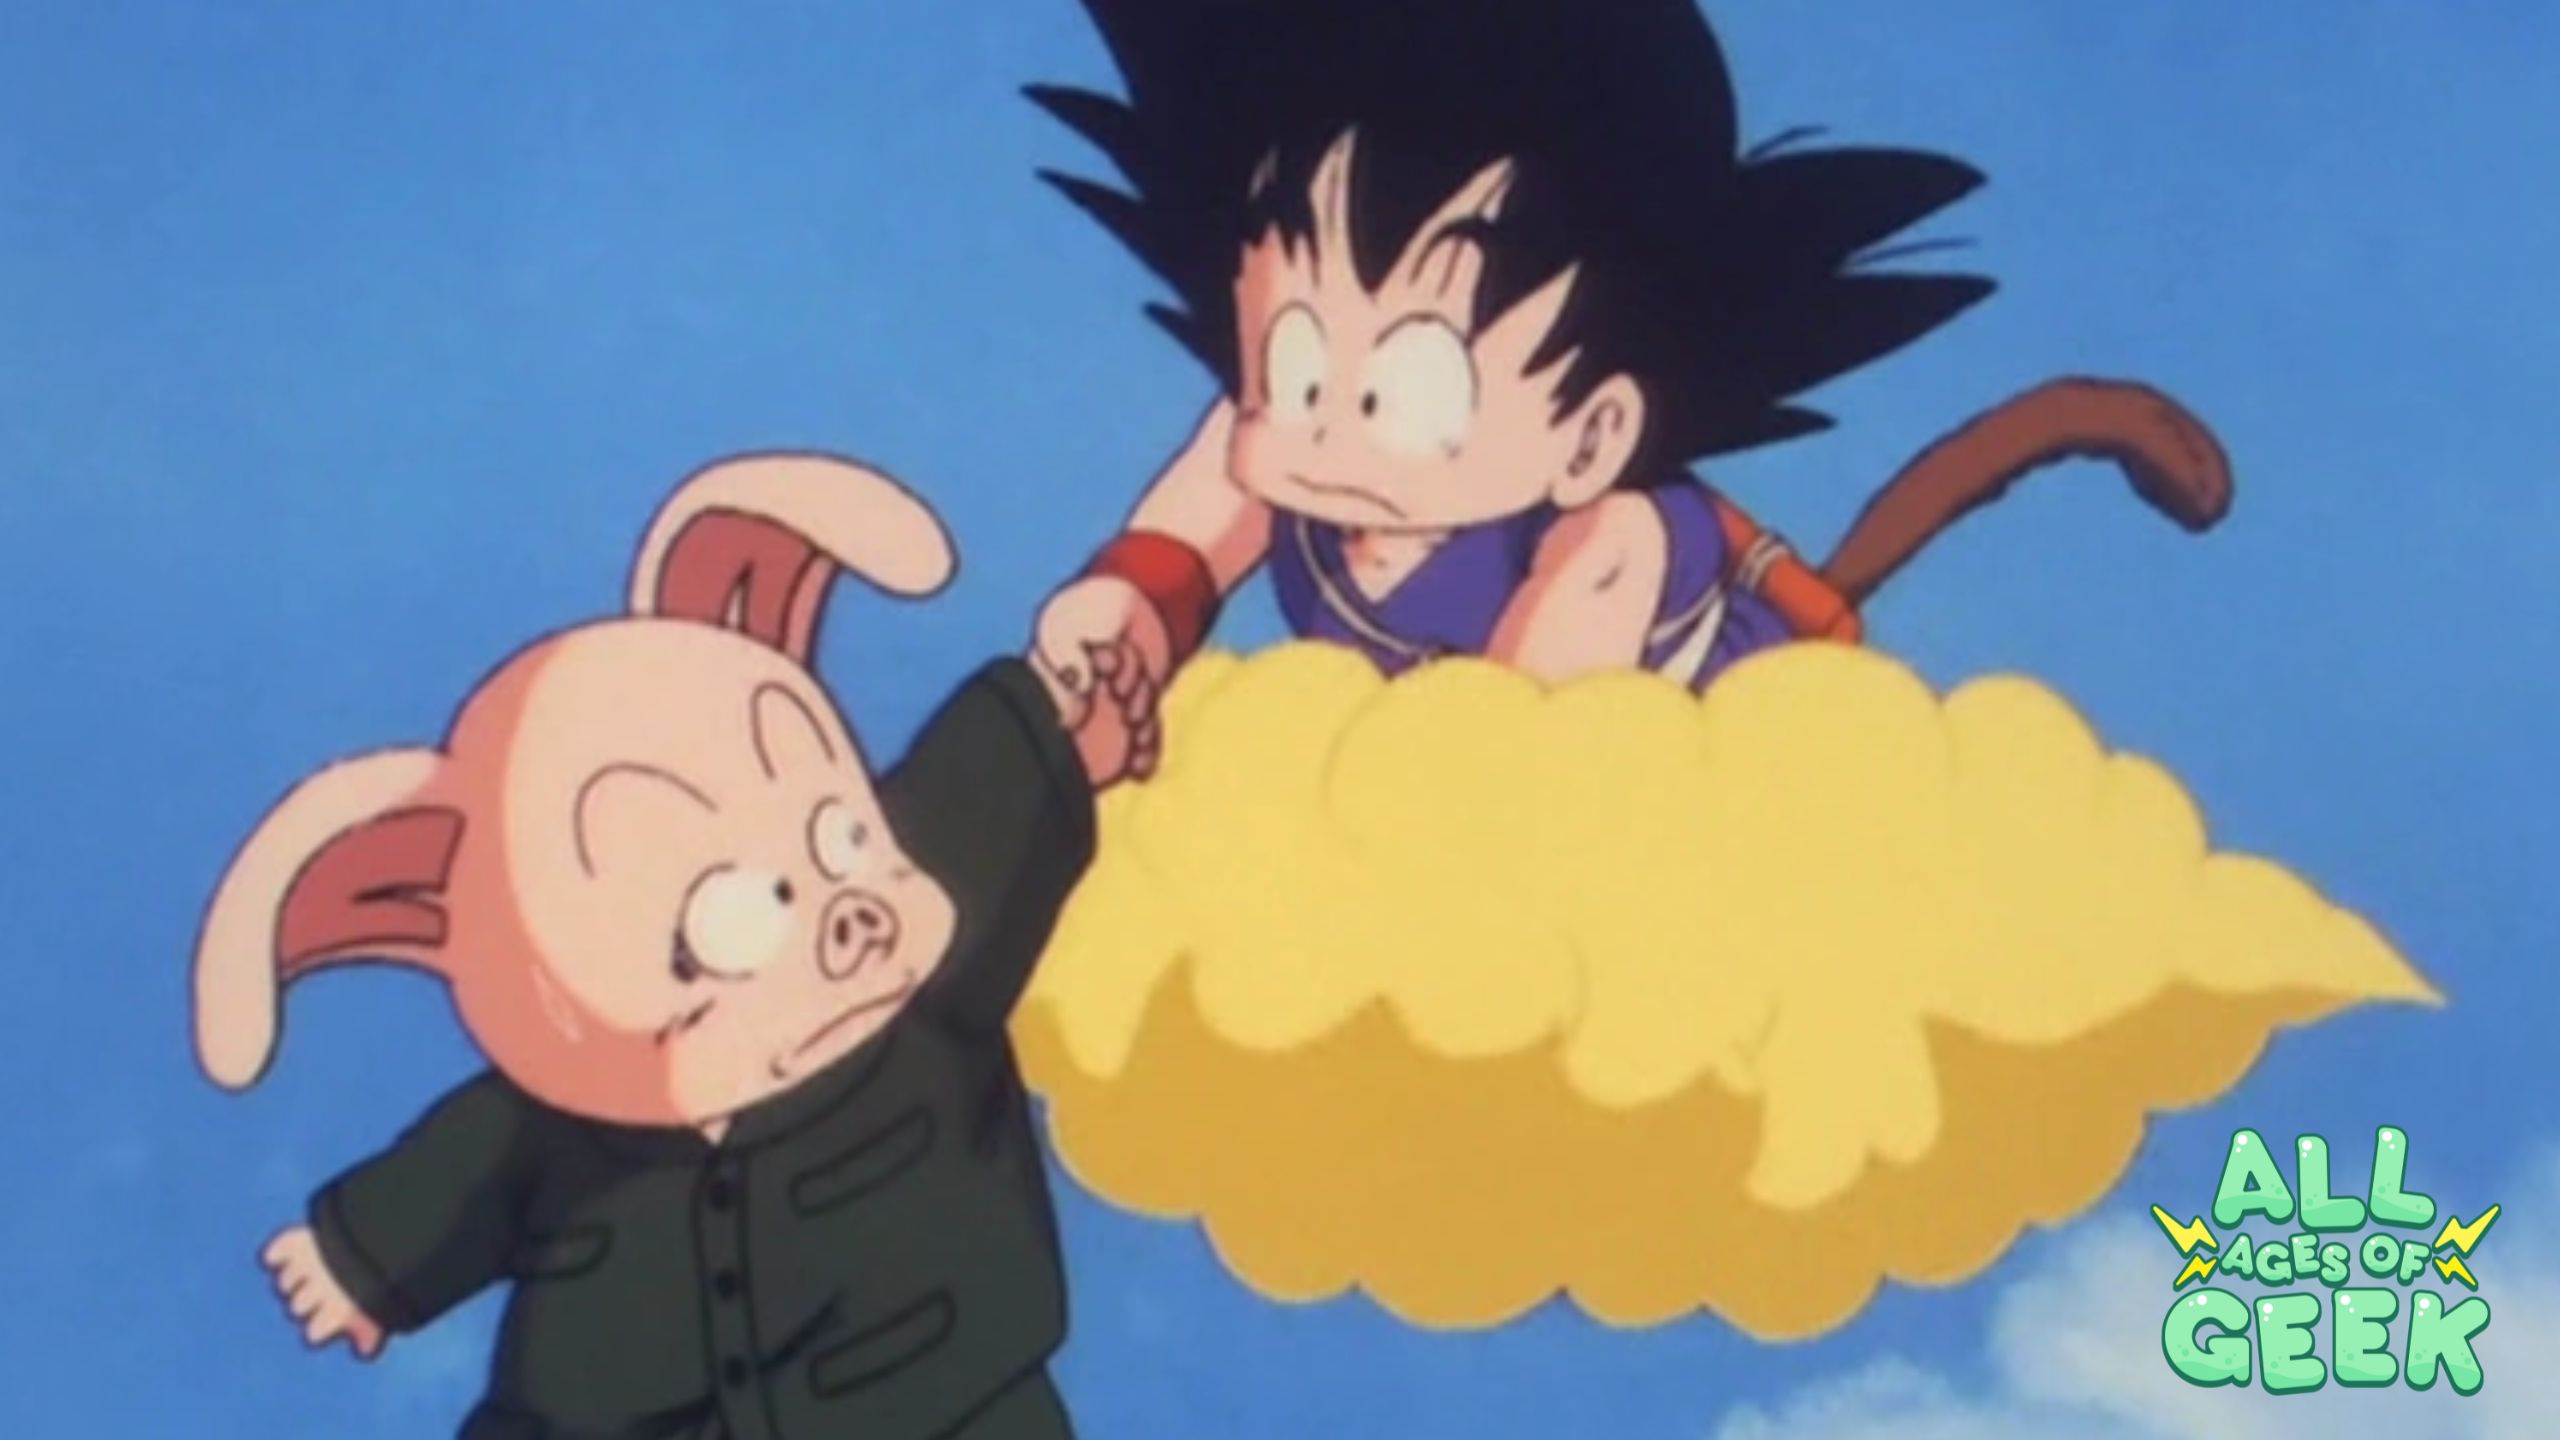 Dragon Ball Episode 4 Review: “Oolong the Terrible”